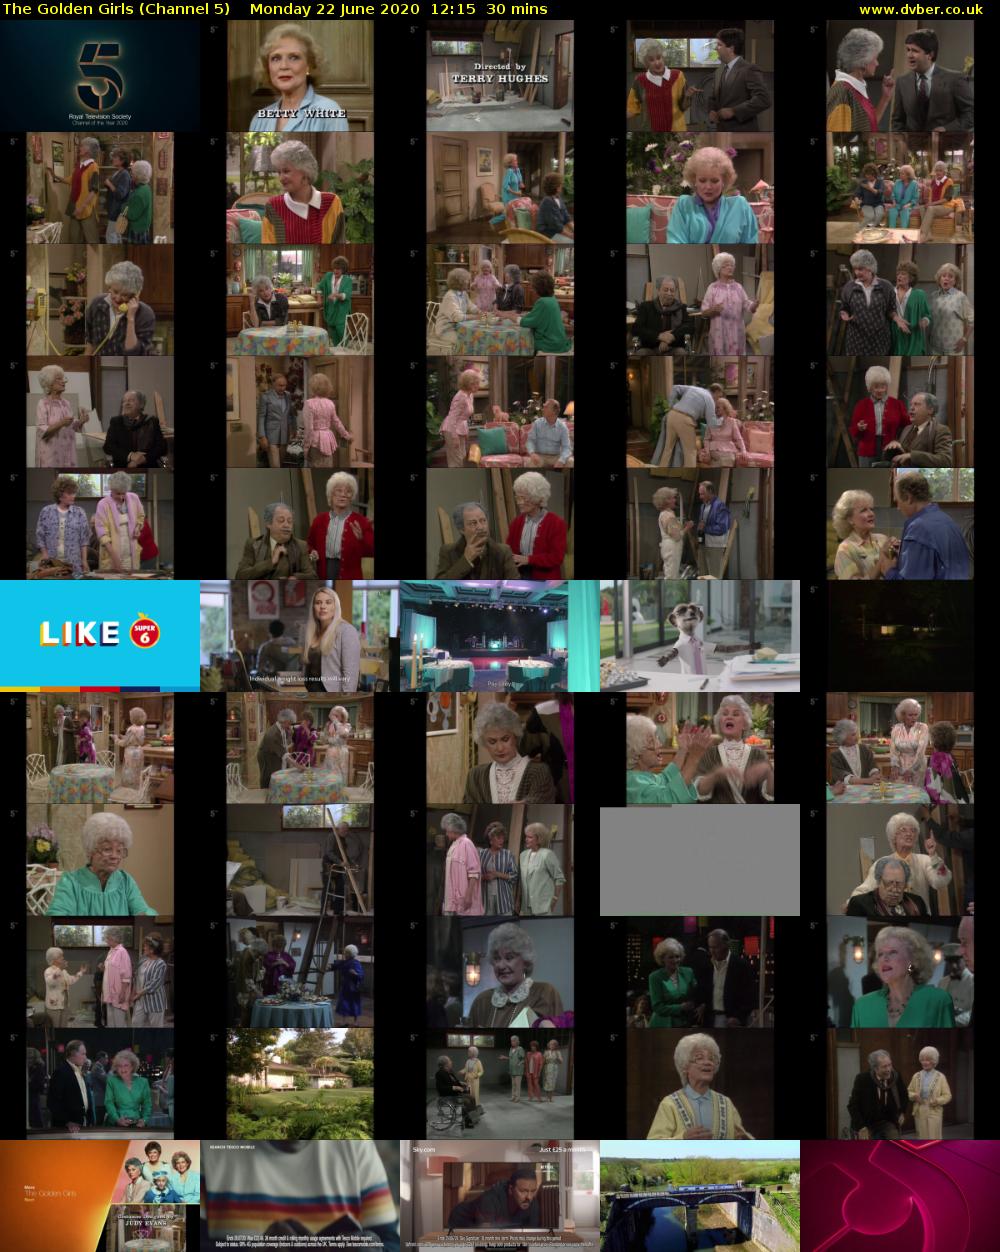 The Golden Girls (Channel 5) Monday 22 June 2020 12:15 - 12:45